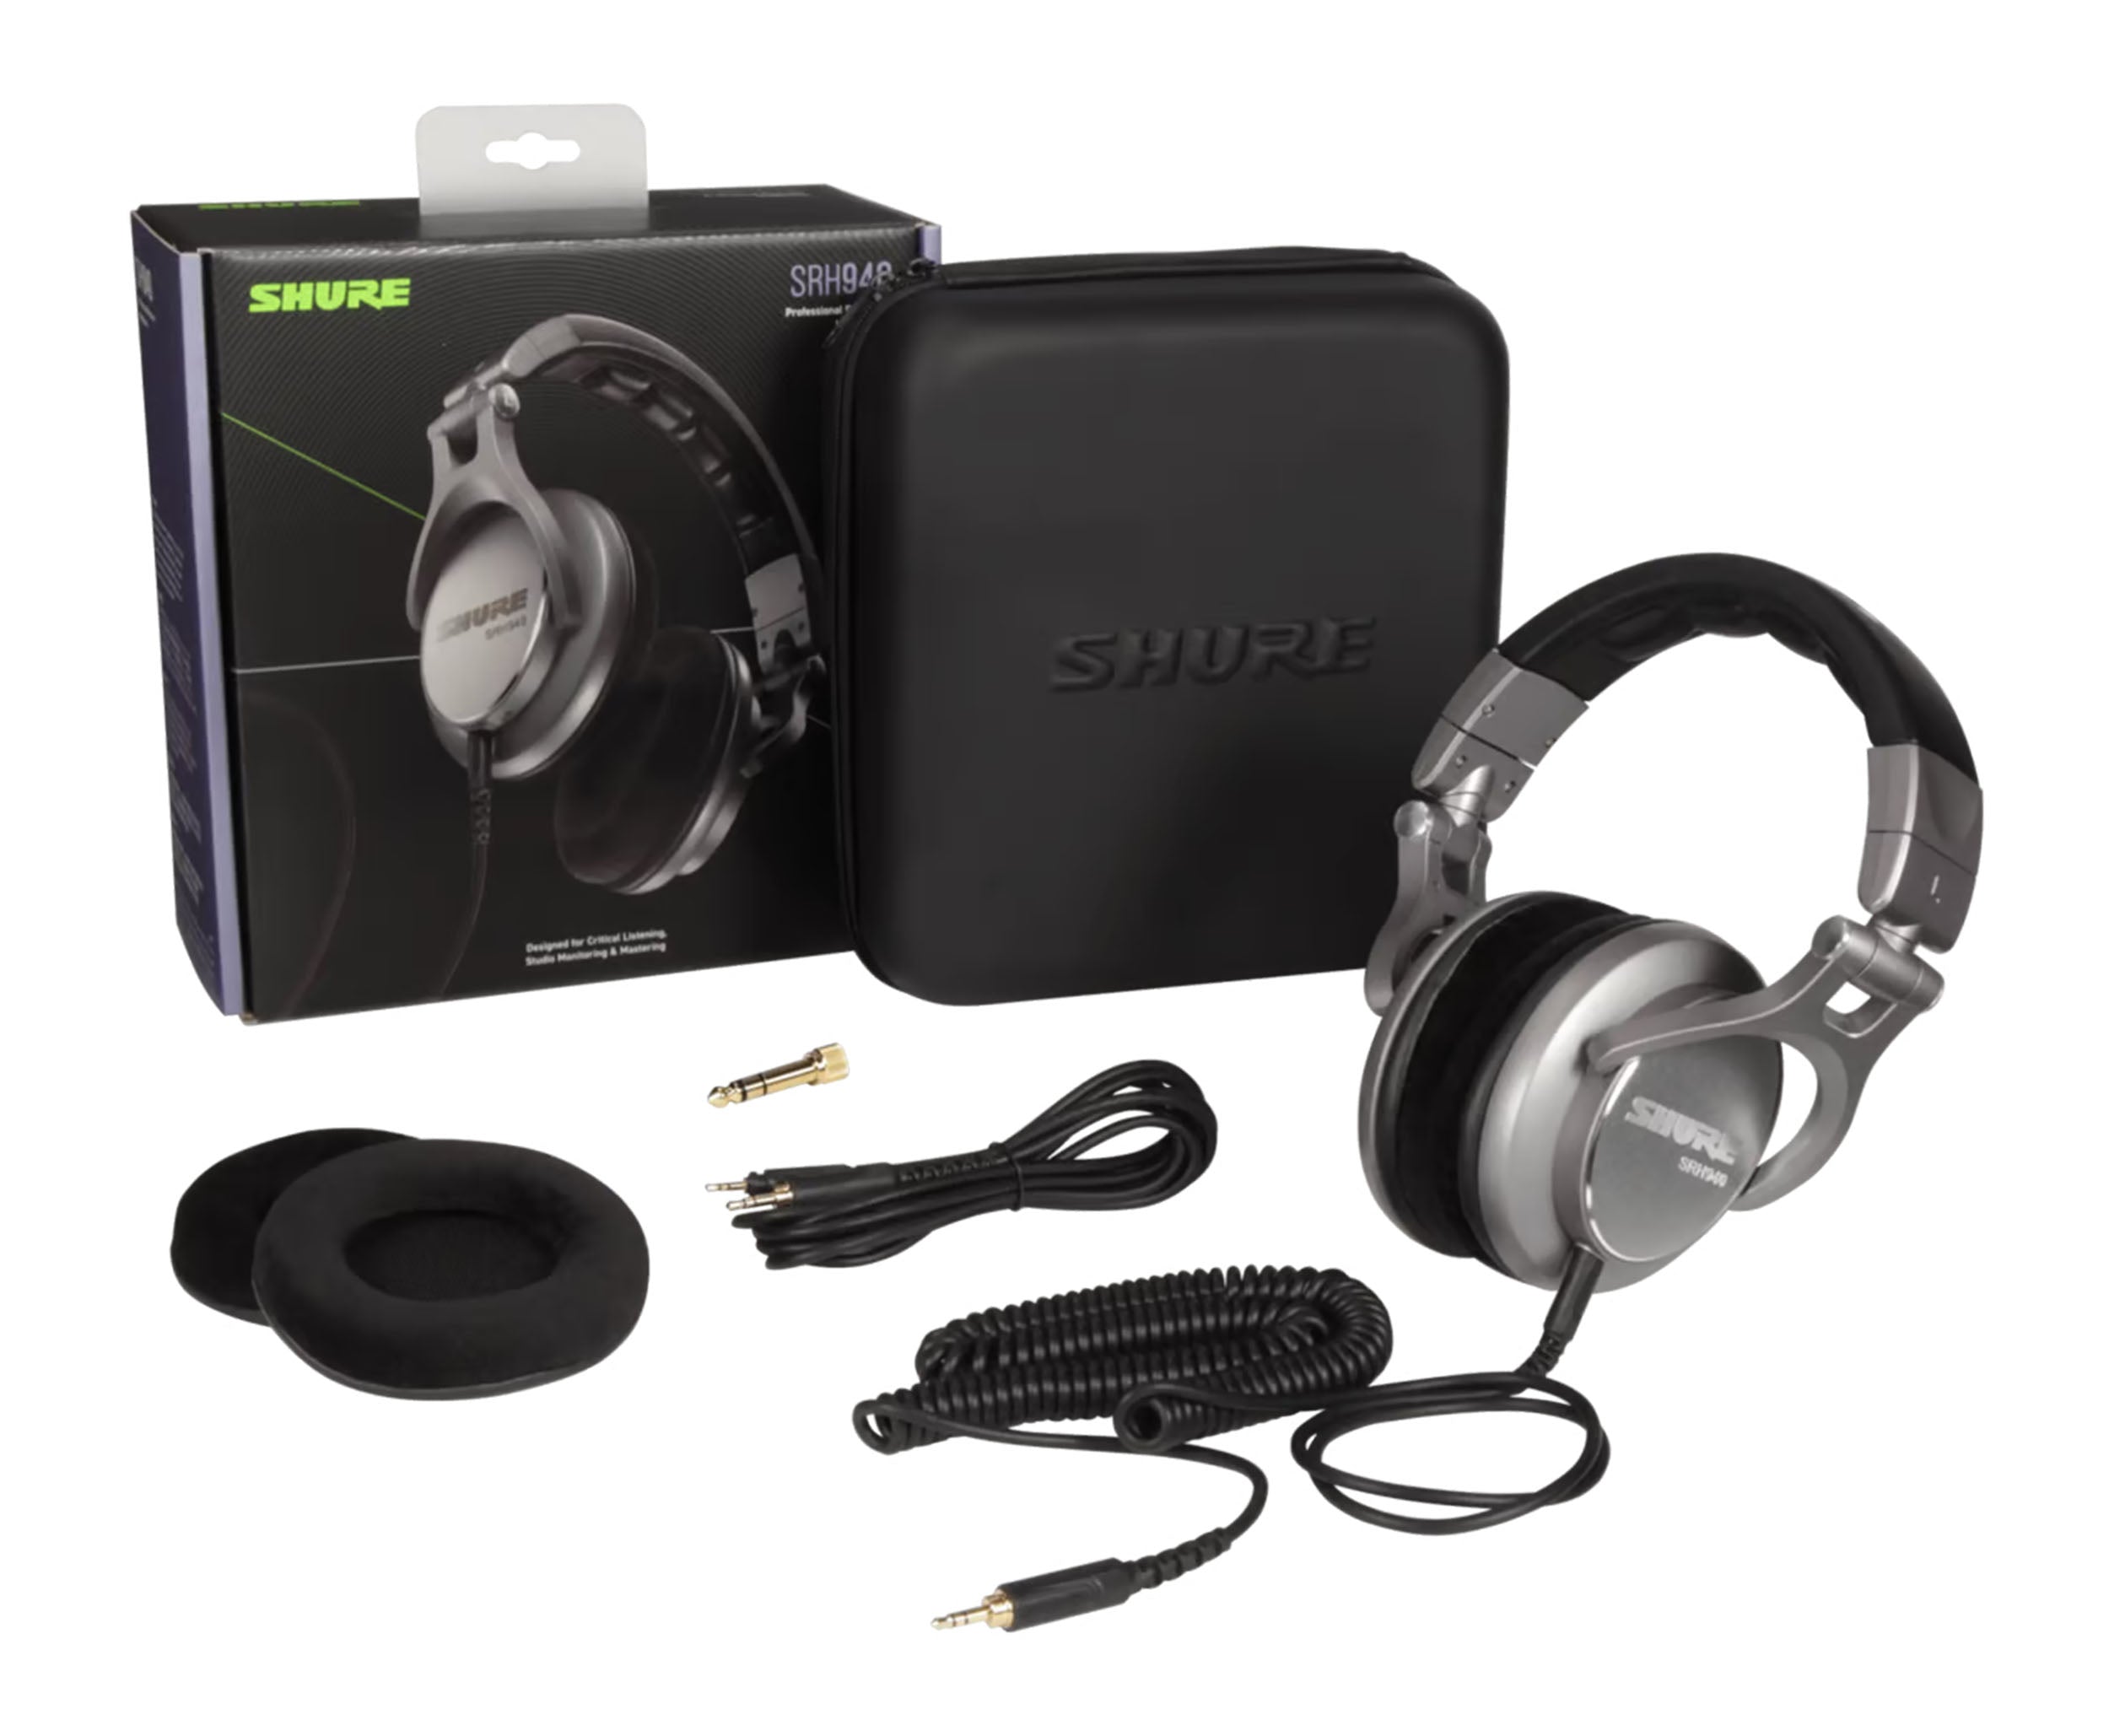 B-Stock: Shure SRH940 Professional Reference Headphones by Shure